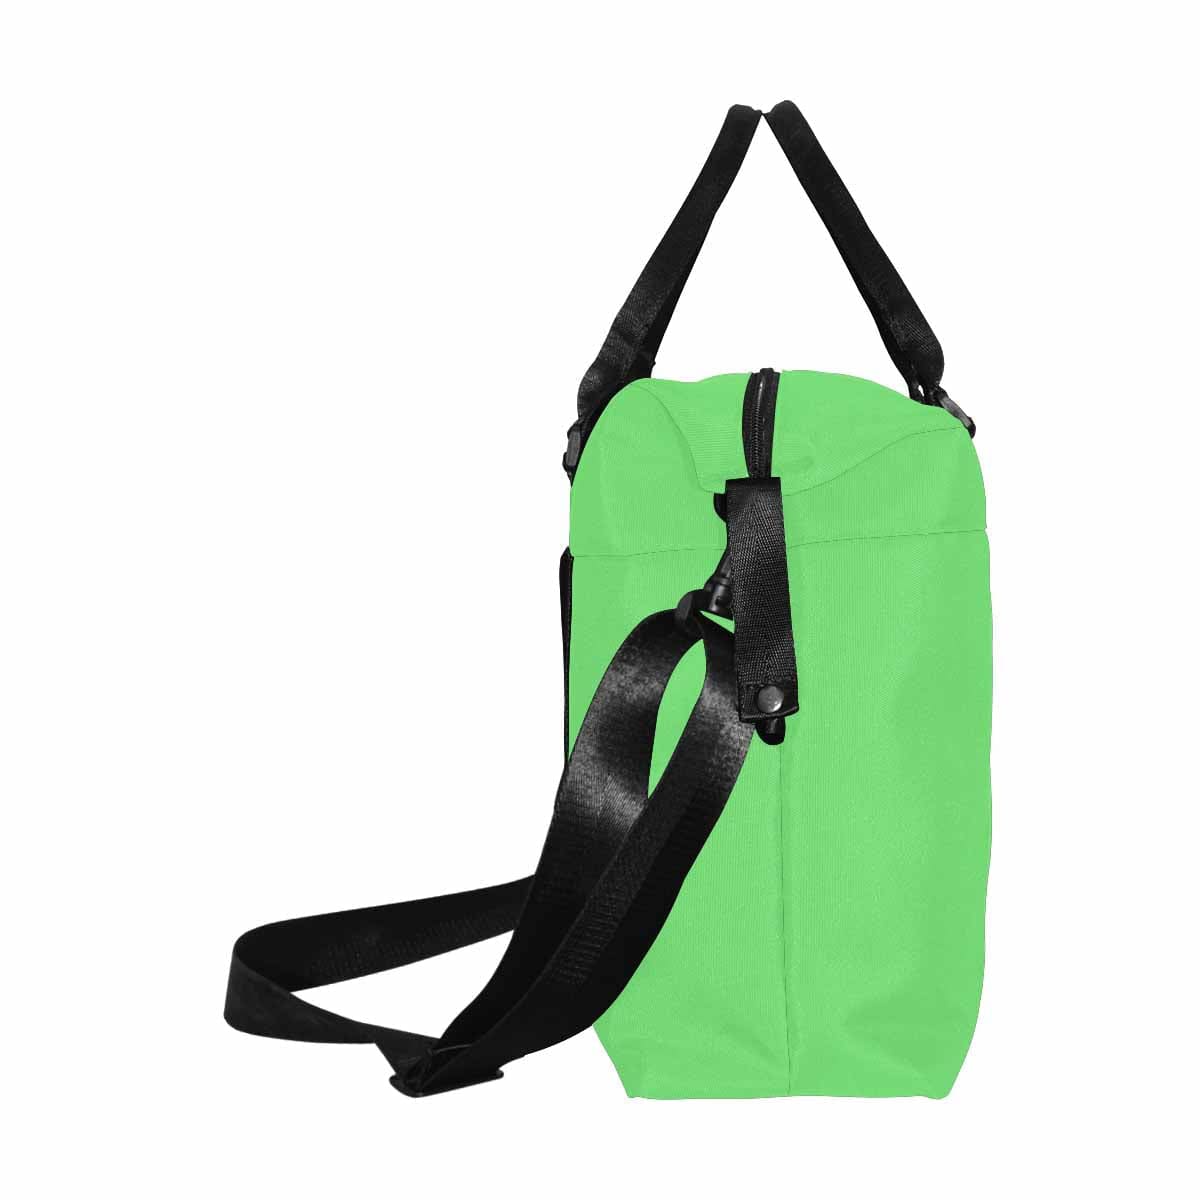 Travel Bag Pastel Green Canvas Carry On - Bags | Travel Bags | Canvas Carry